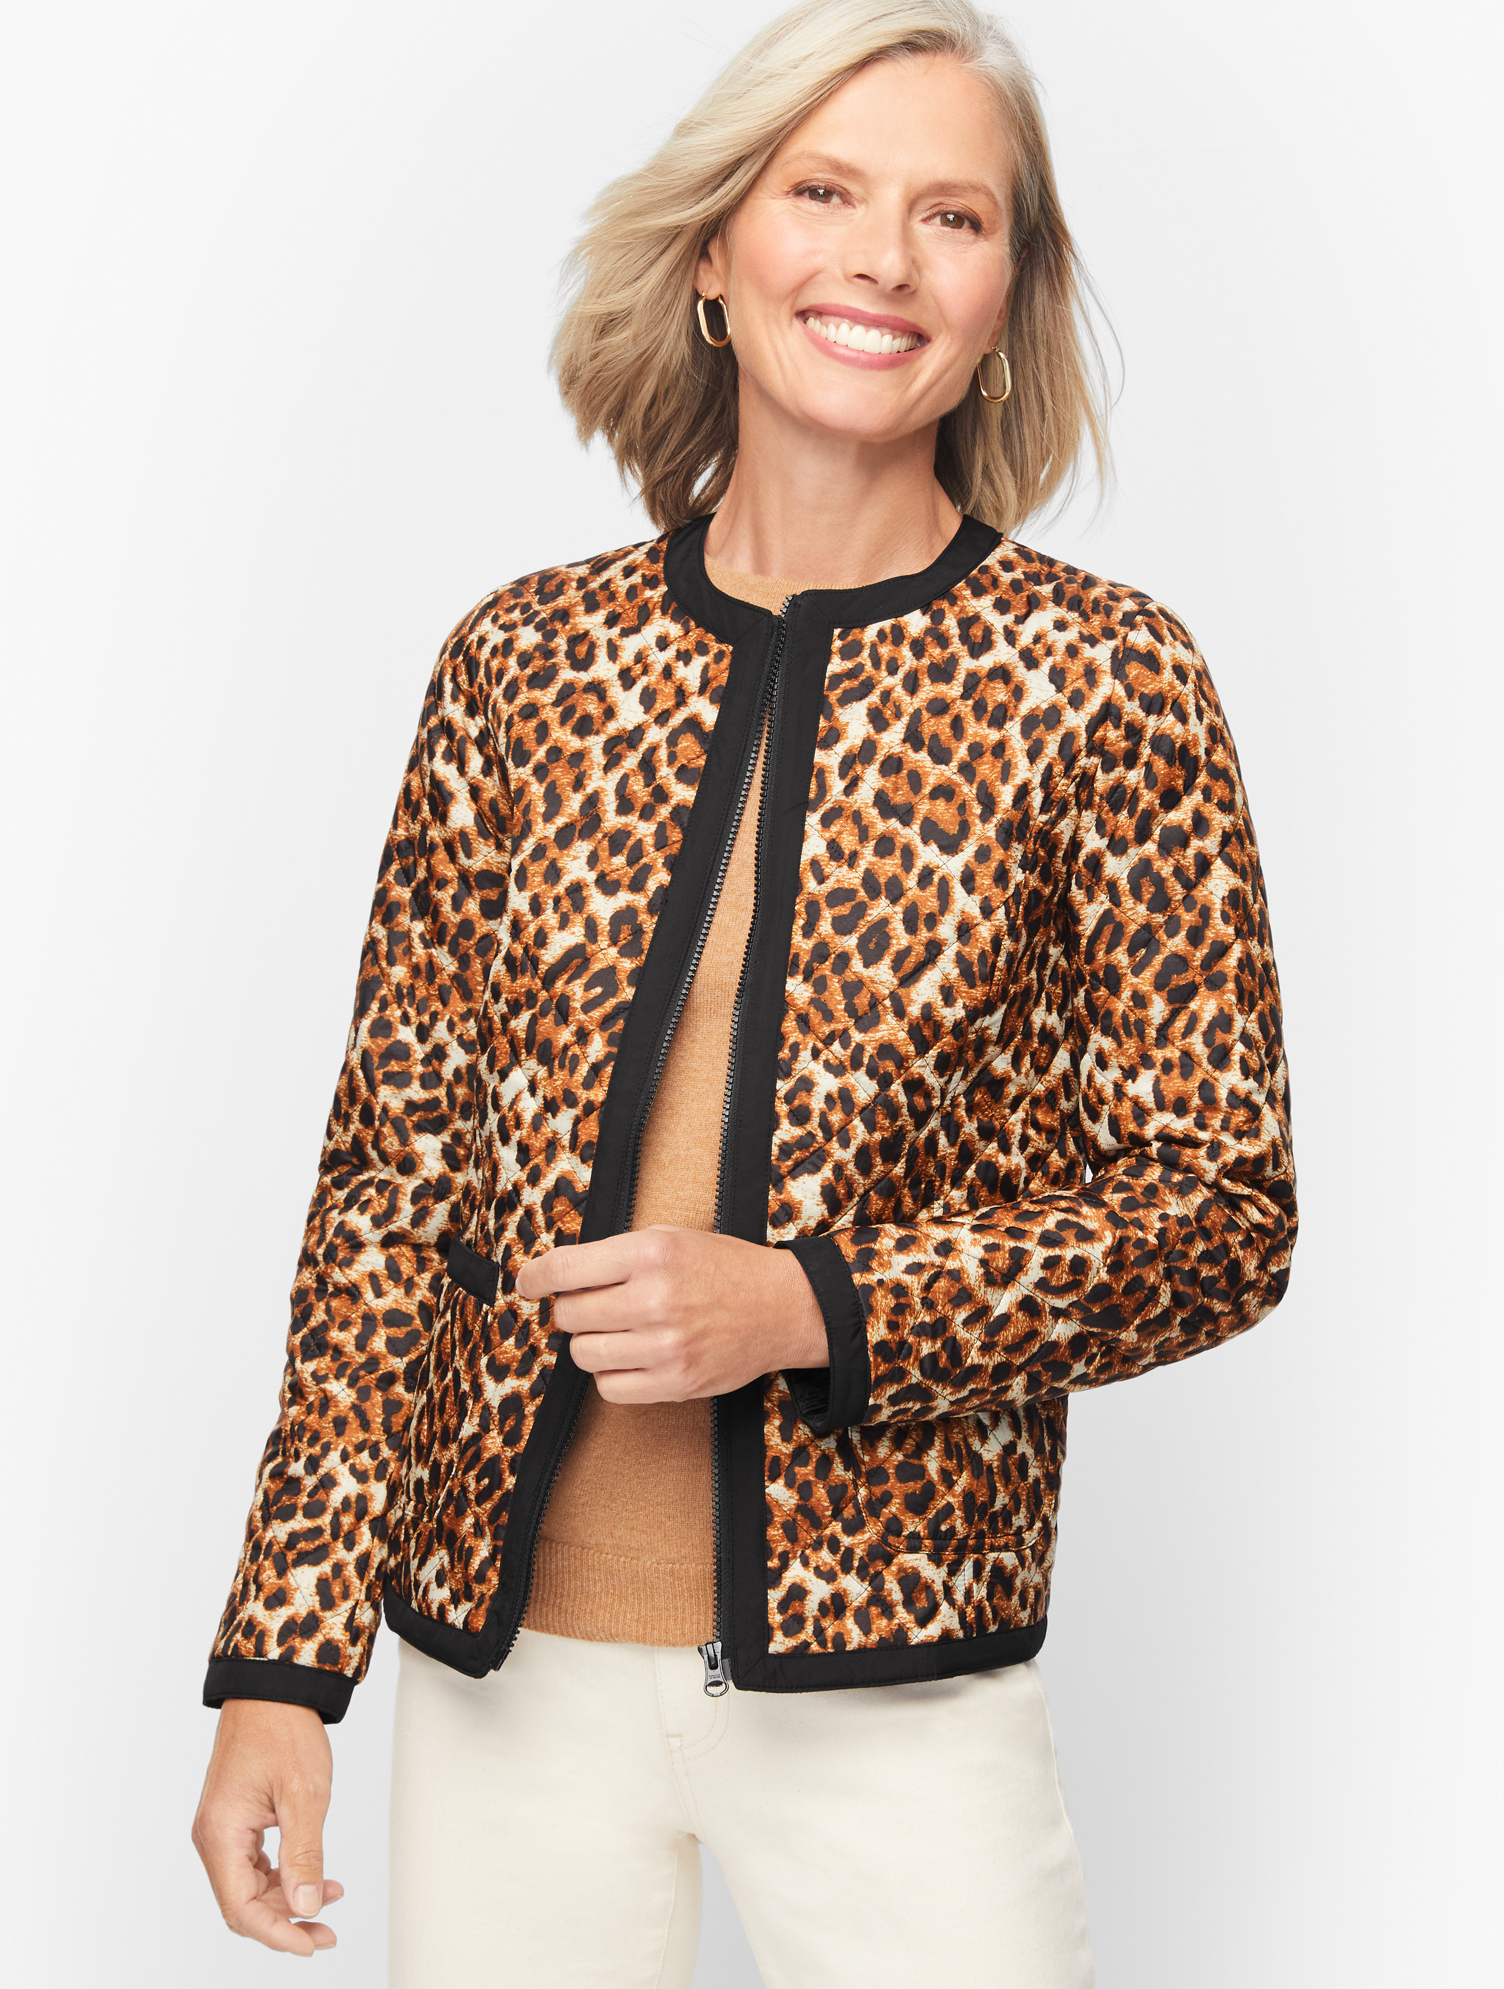 Talbots Animal Print Quilted Jacket - Spice/black - Xs  In Spice,black